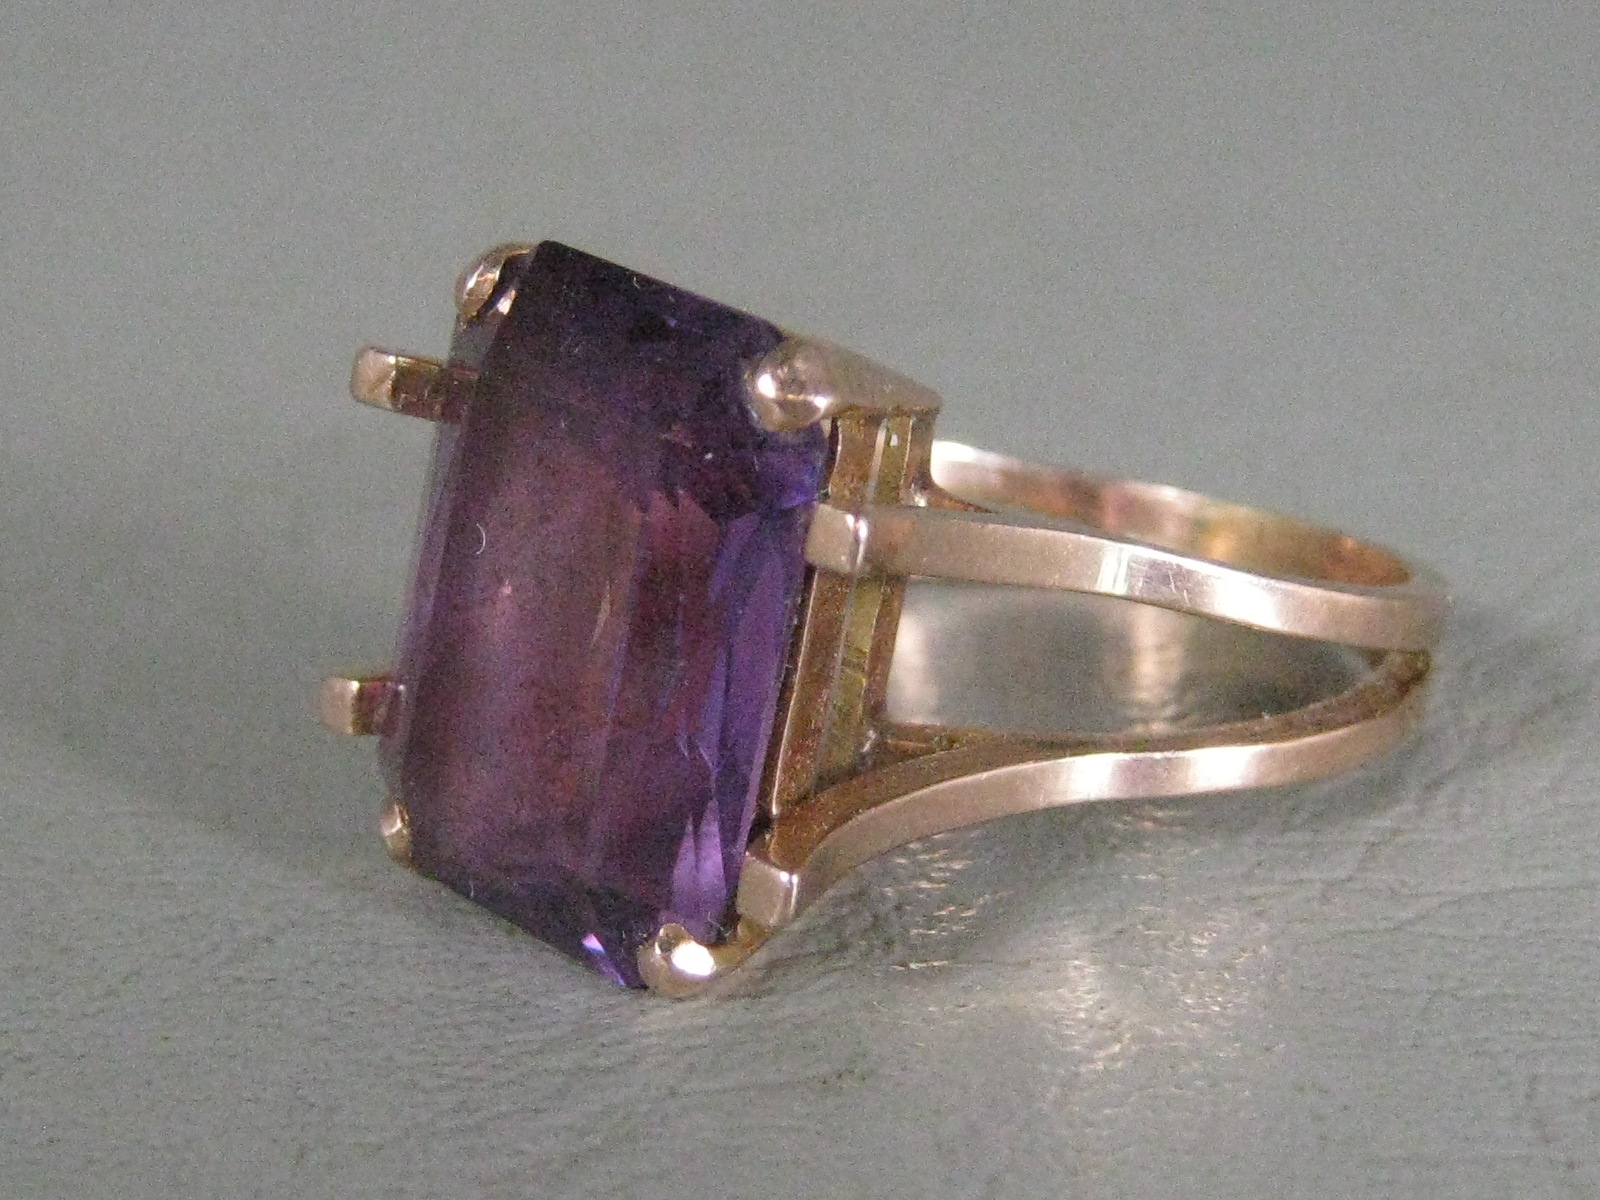 Vintage Antique Amethyst Ring Size 8.25 Estate Jewelry Rose Gold? No Reserve! 3